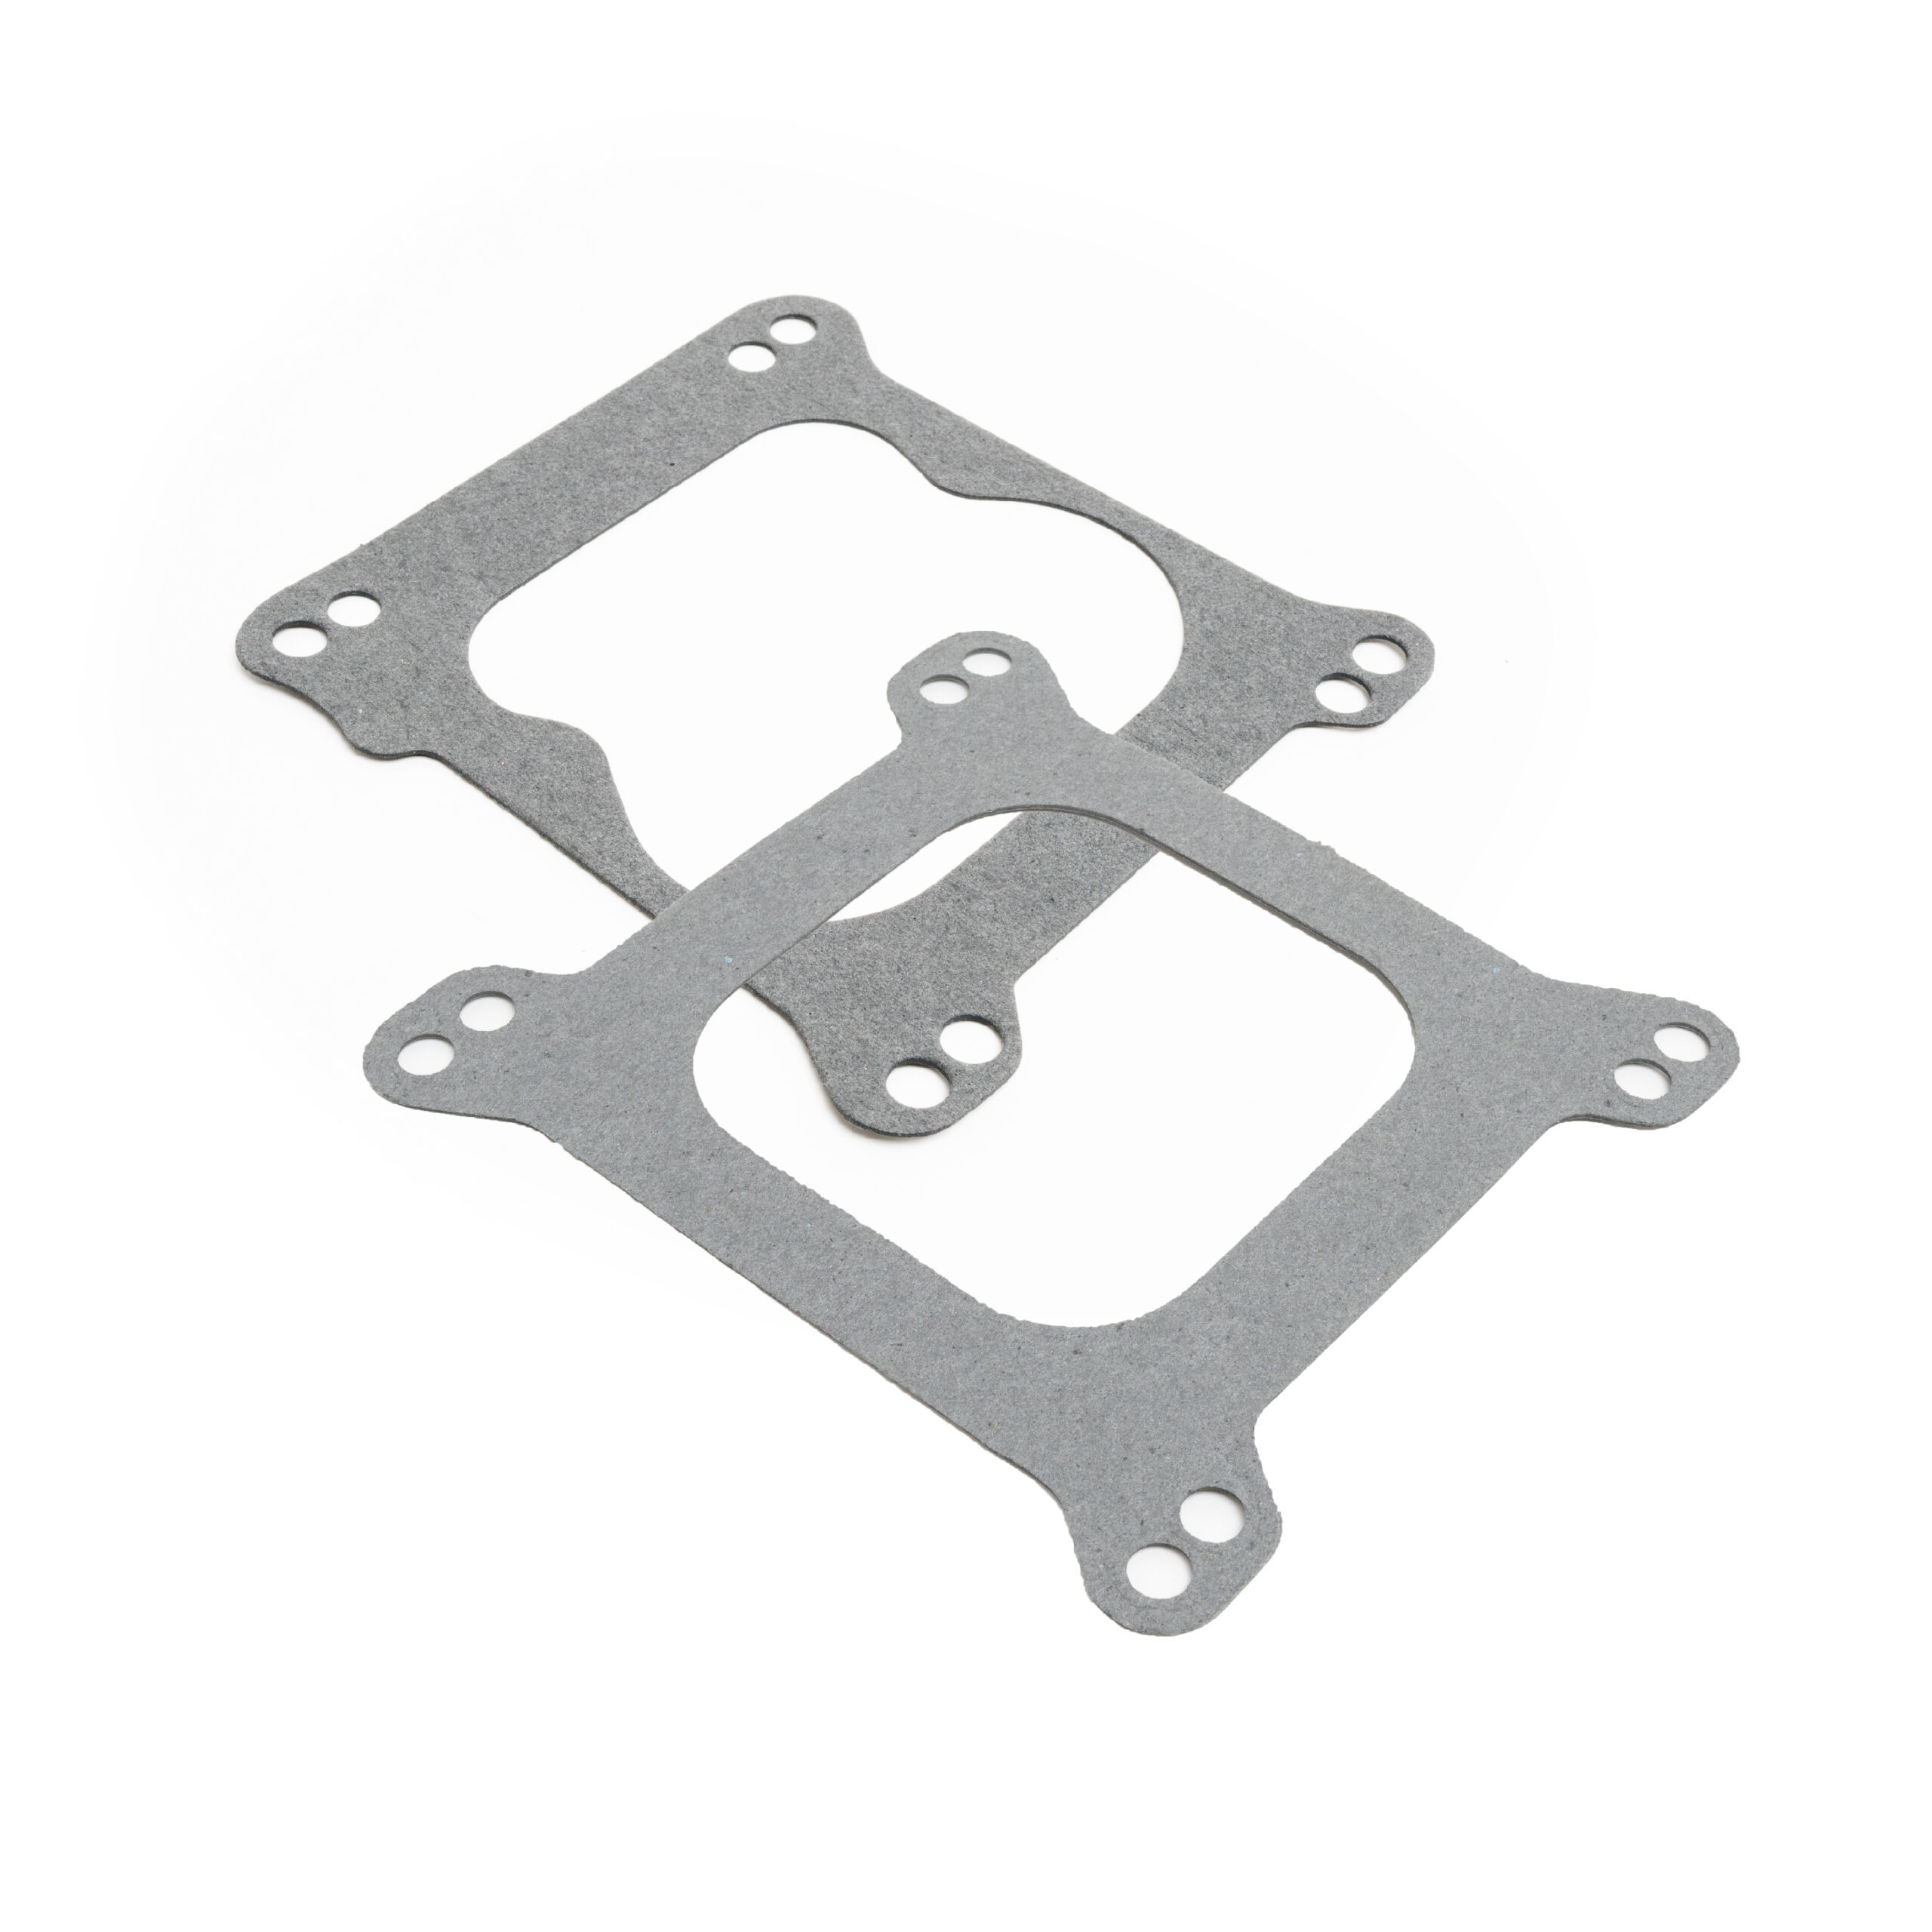 Racing Power Company R2066G Carburetor Base Plate Gasket, 4-Barrel, Open, One Square Bore, One Spread Bore, Composite, Spread / Square Bore Adapter, Kit